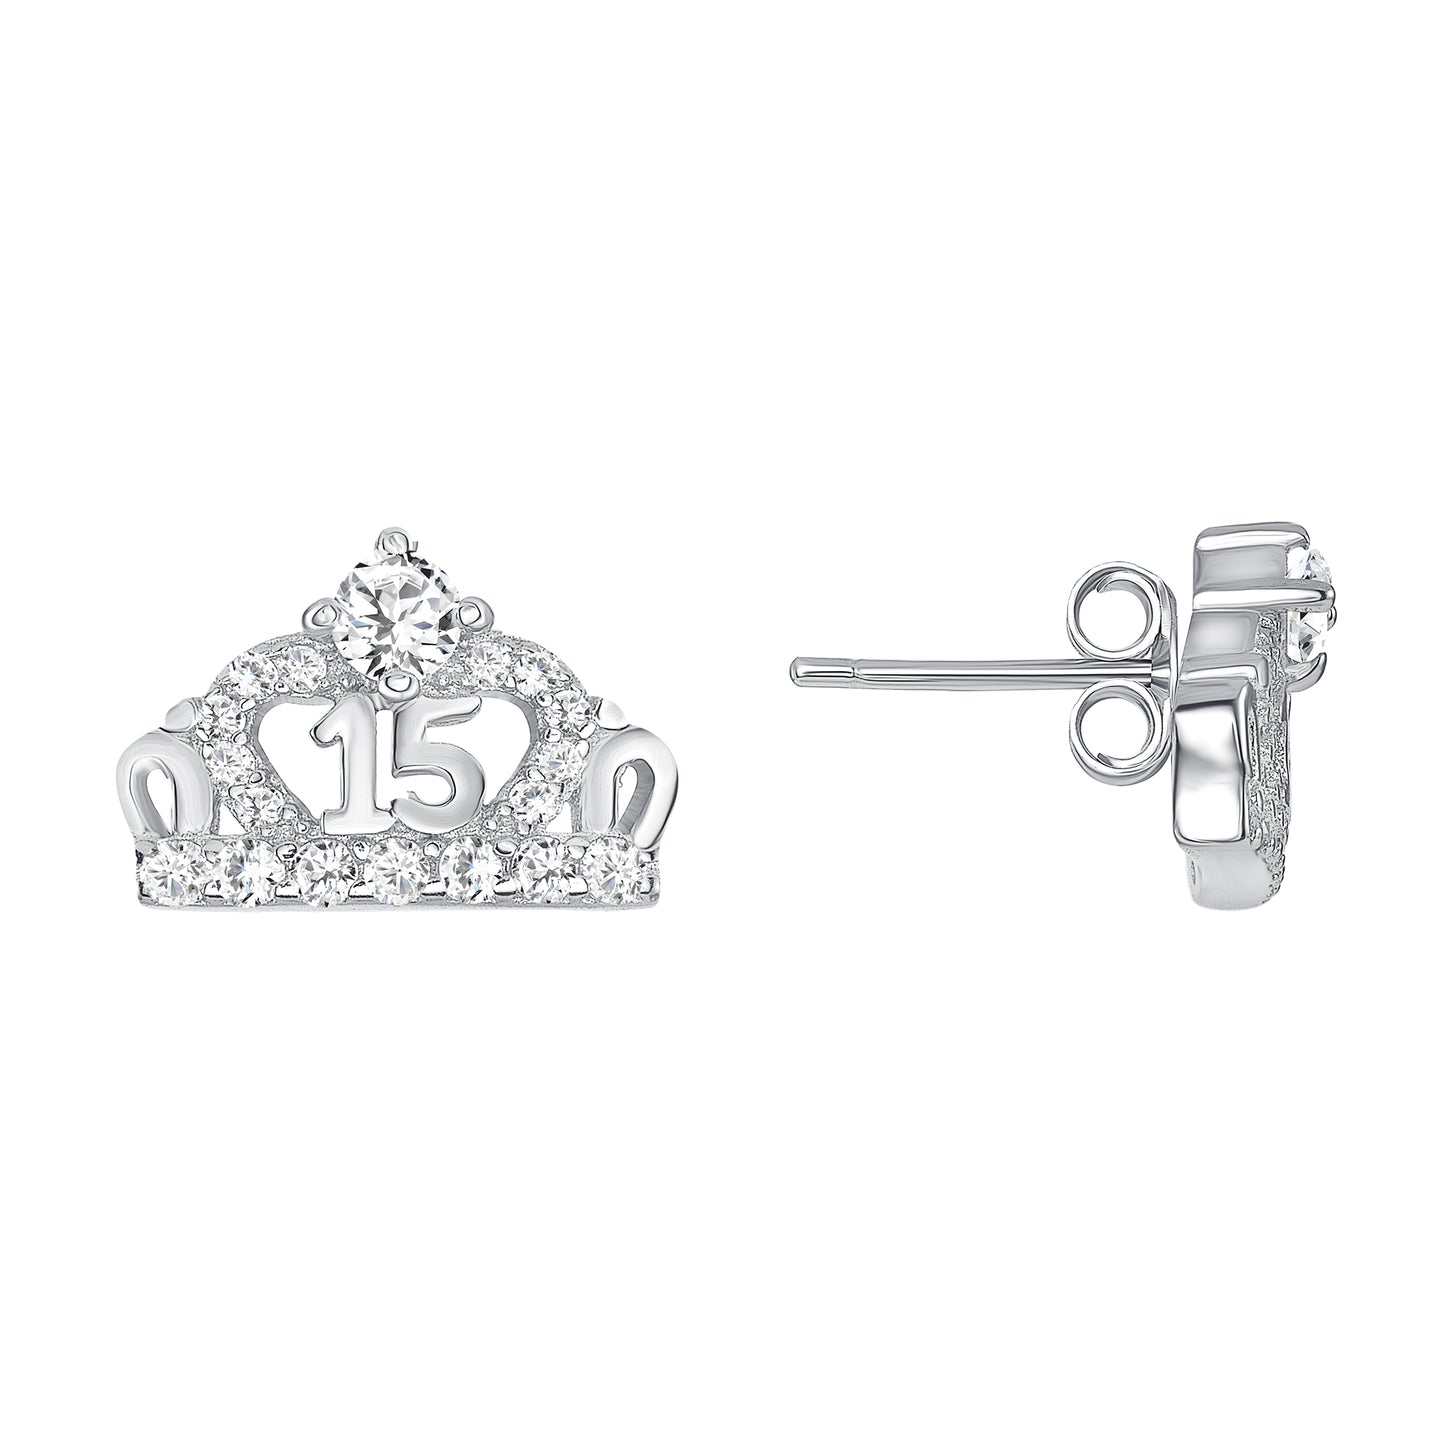 Silver 925 Rhodium Plated Crown 15 Years Cubic Zirconia Set. B12668